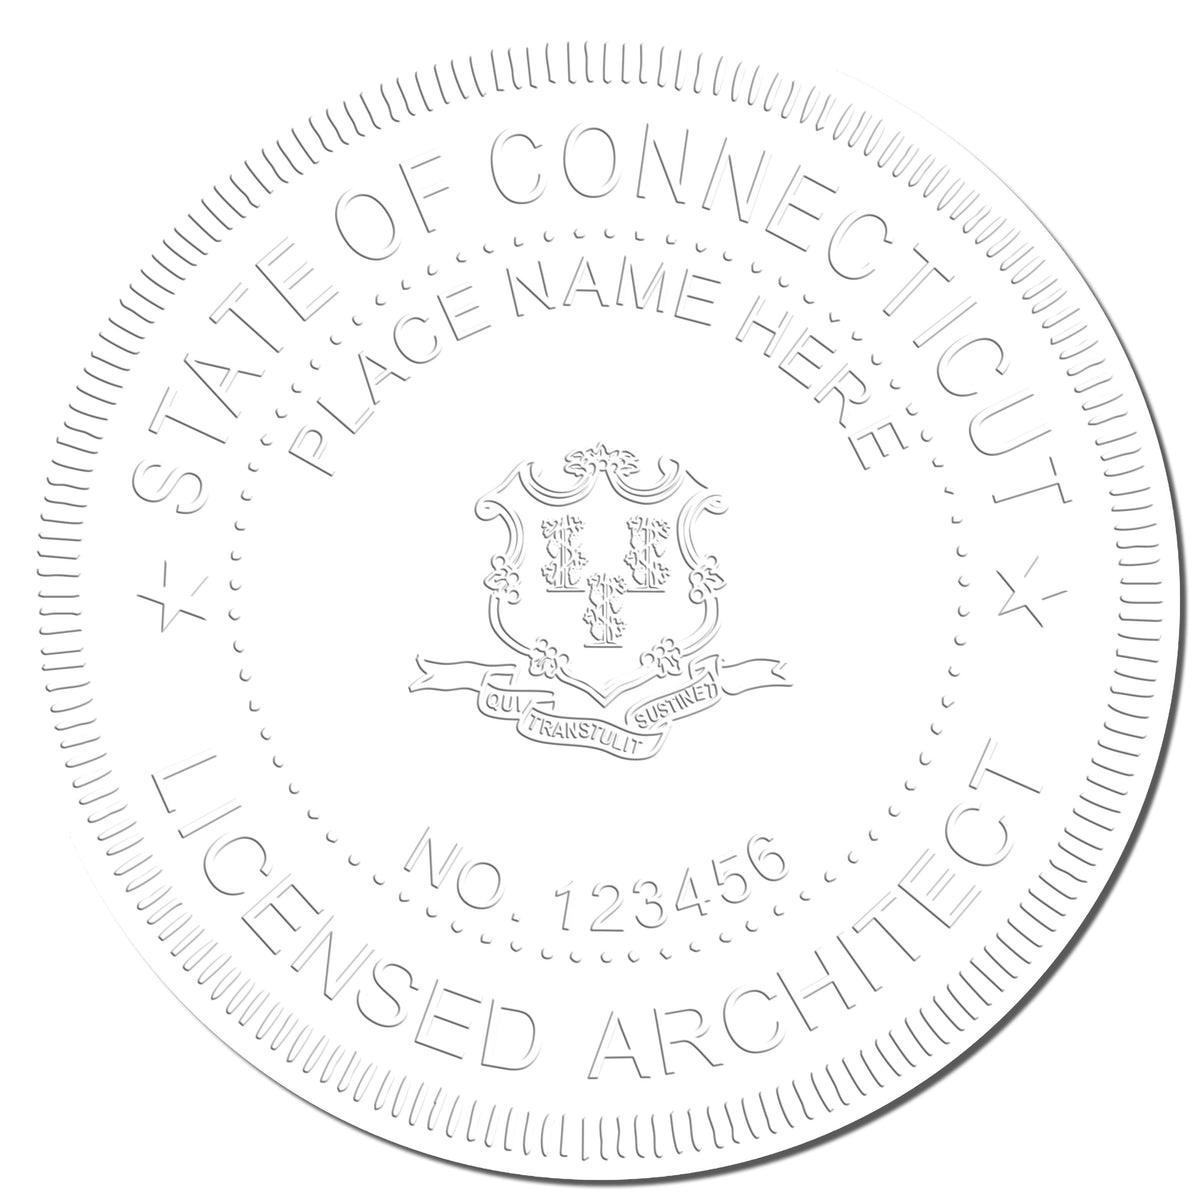 This paper is stamped with a sample imprint of the State of Connecticut Architectural Seal Embosser, signifying its quality and reliability.